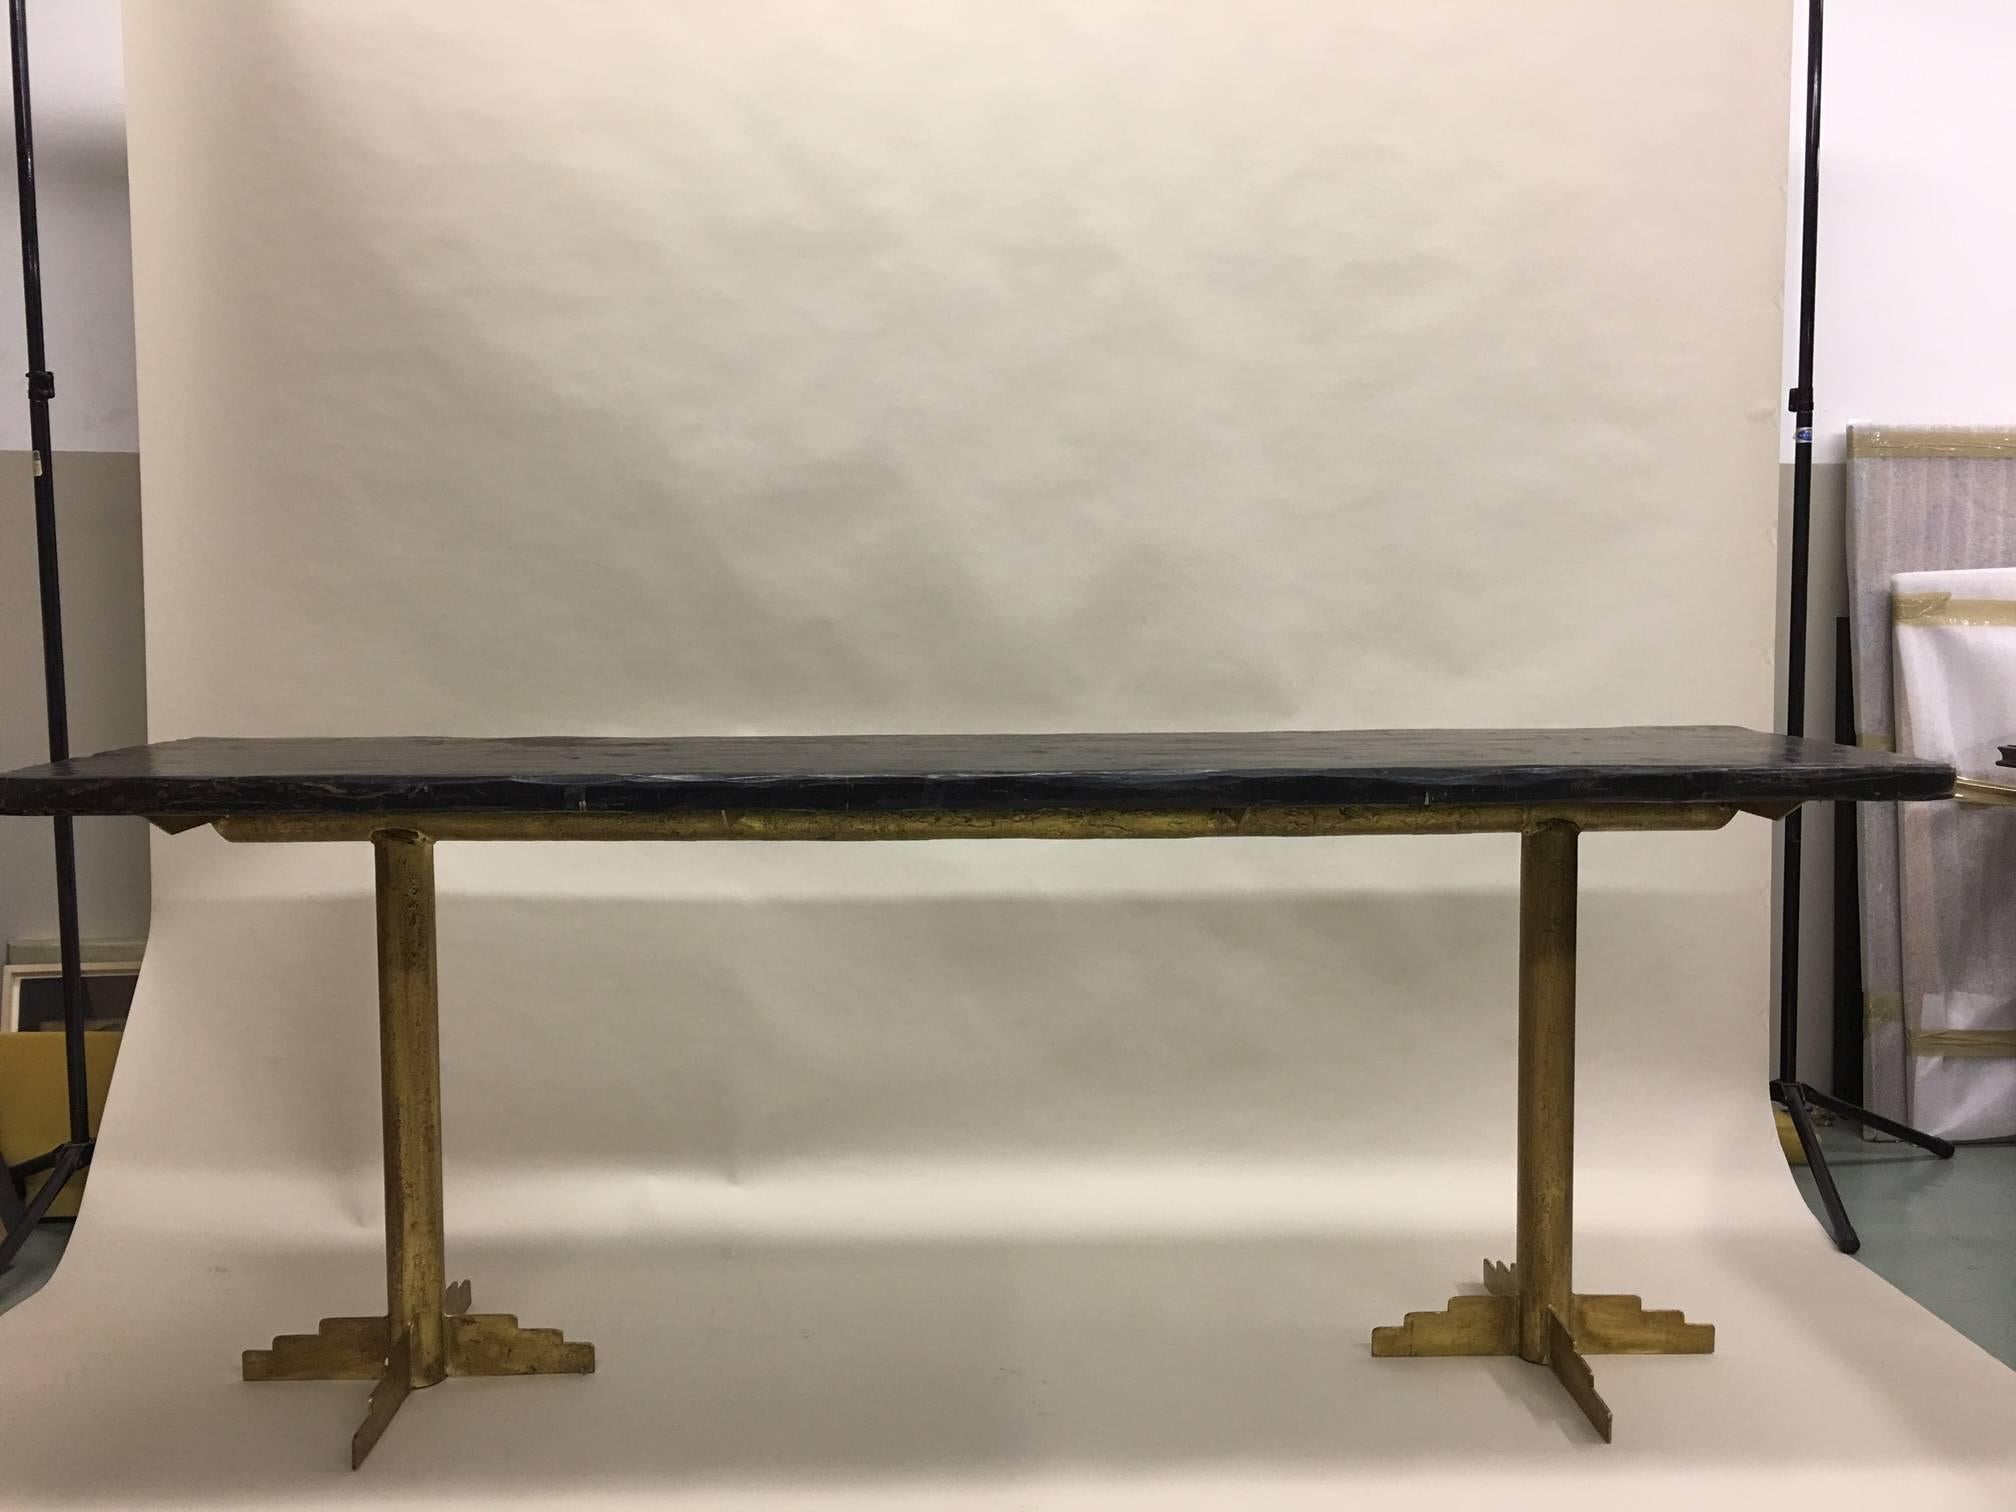 Two large French Mid-Century Modern / Art Deco Gilt iron tables in the tradition of France's great iron workers: Paul Kiss, Edgar Brandt, Raymond Subes and Gilbert Poillerat. 

Each base is composed of two legs with each leg supported by stepped and